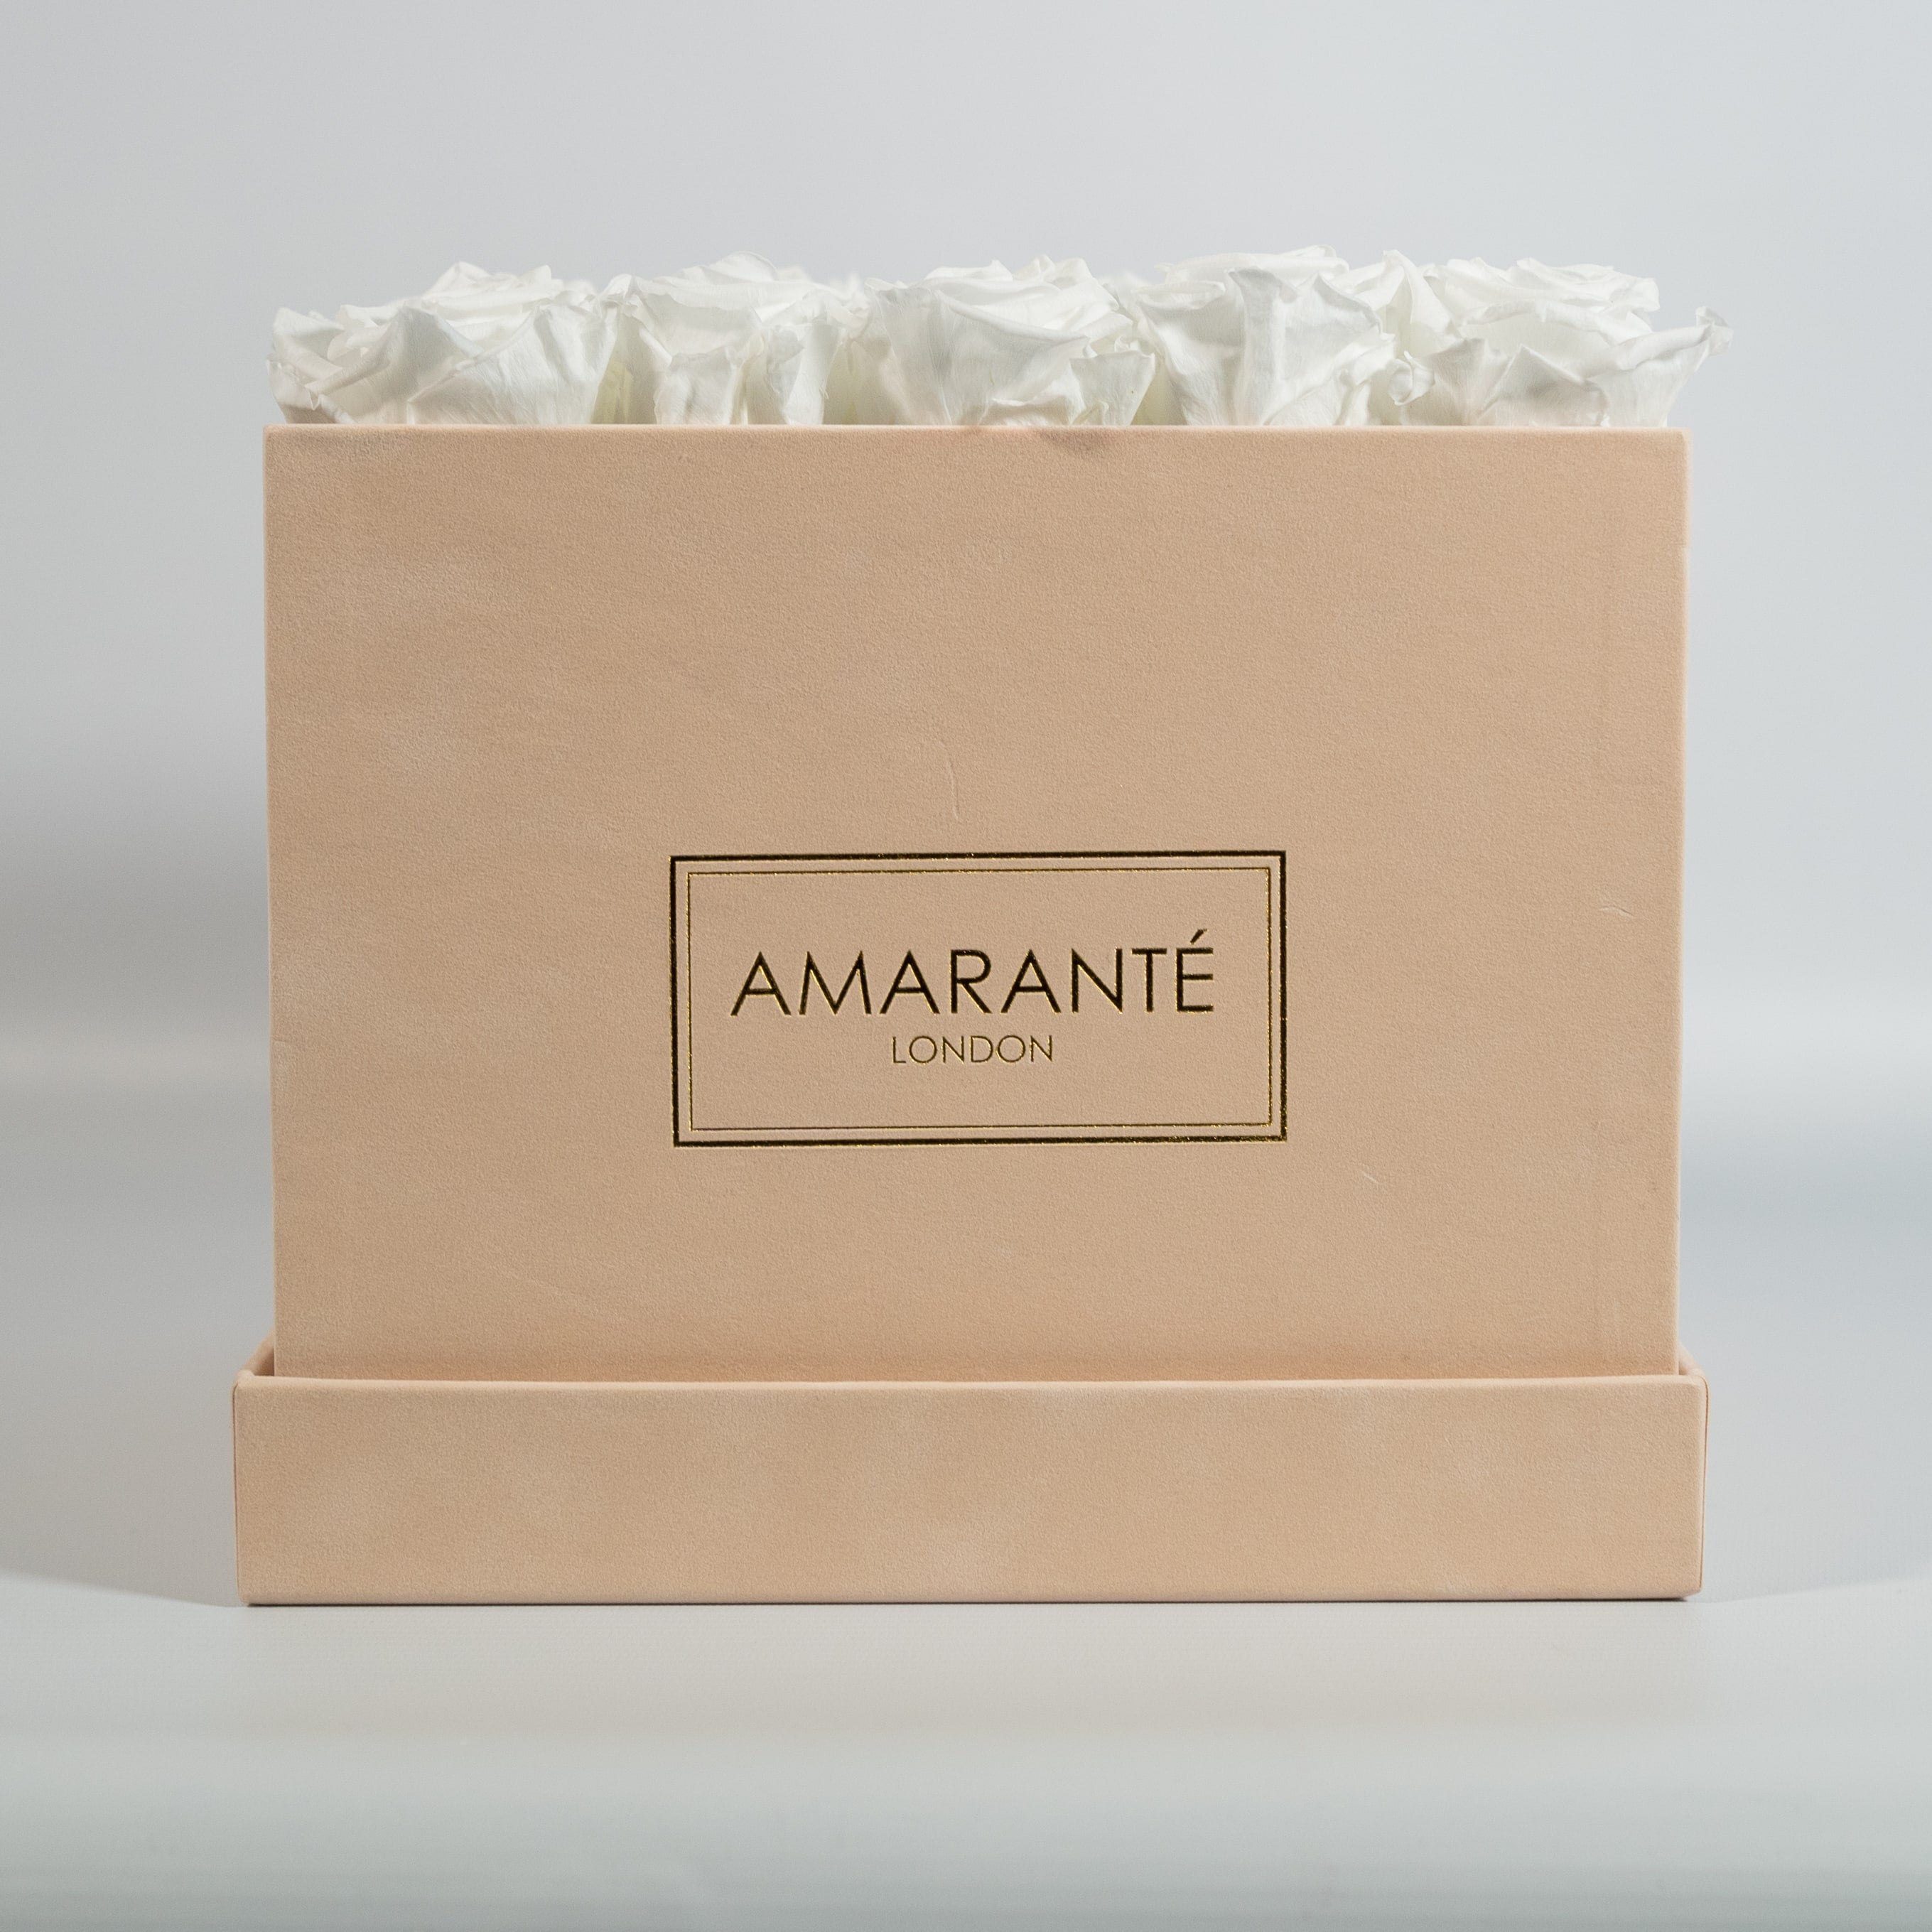 Captivating white Roses in a fashionable beige box.